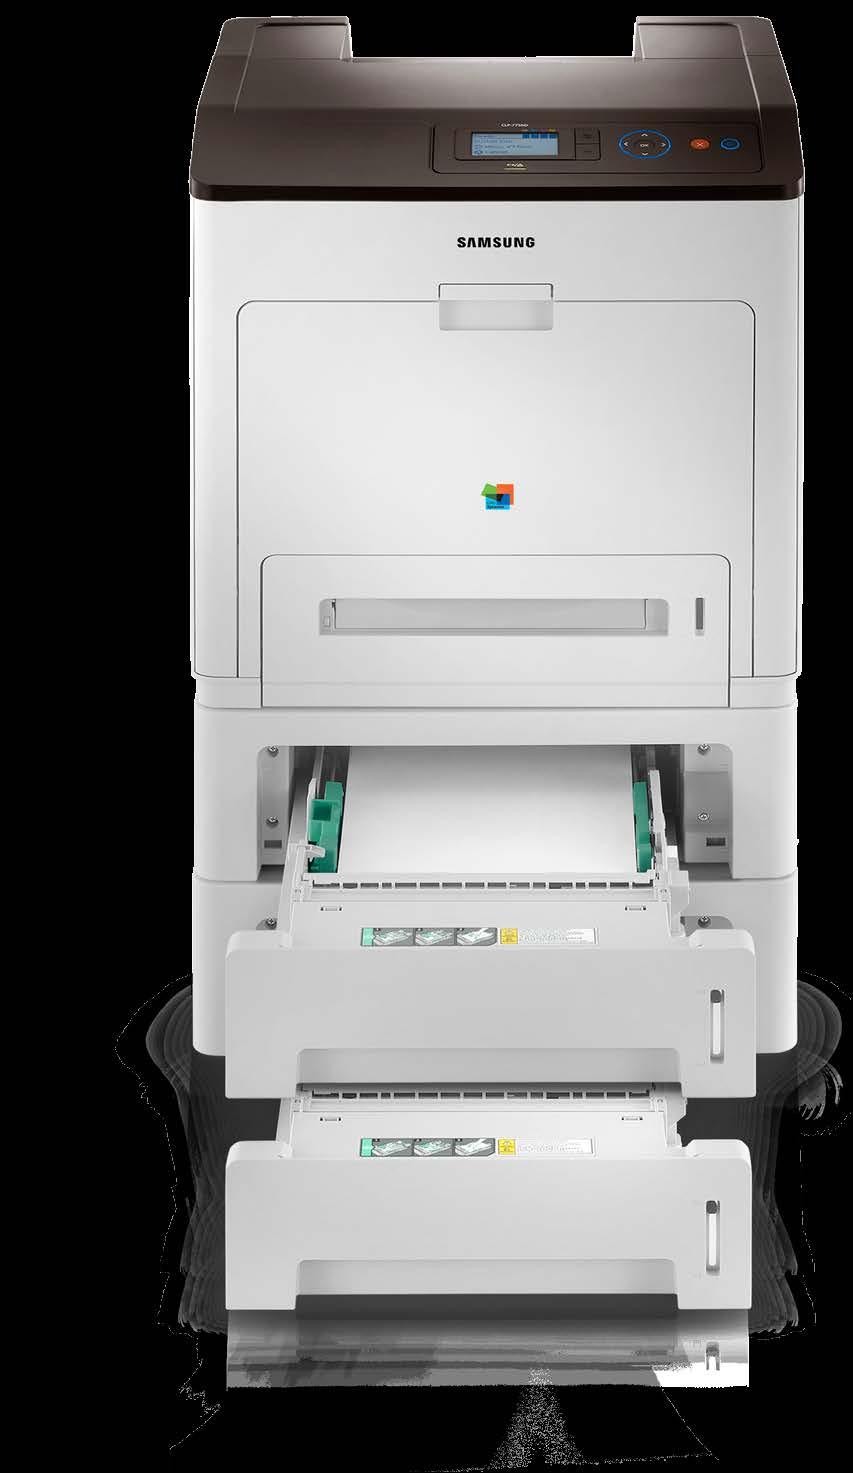 When you have a busy office, you need a colour laser printer that can deliver. High performance, high quality and high usability the Samsung CLP-775ND has it all.